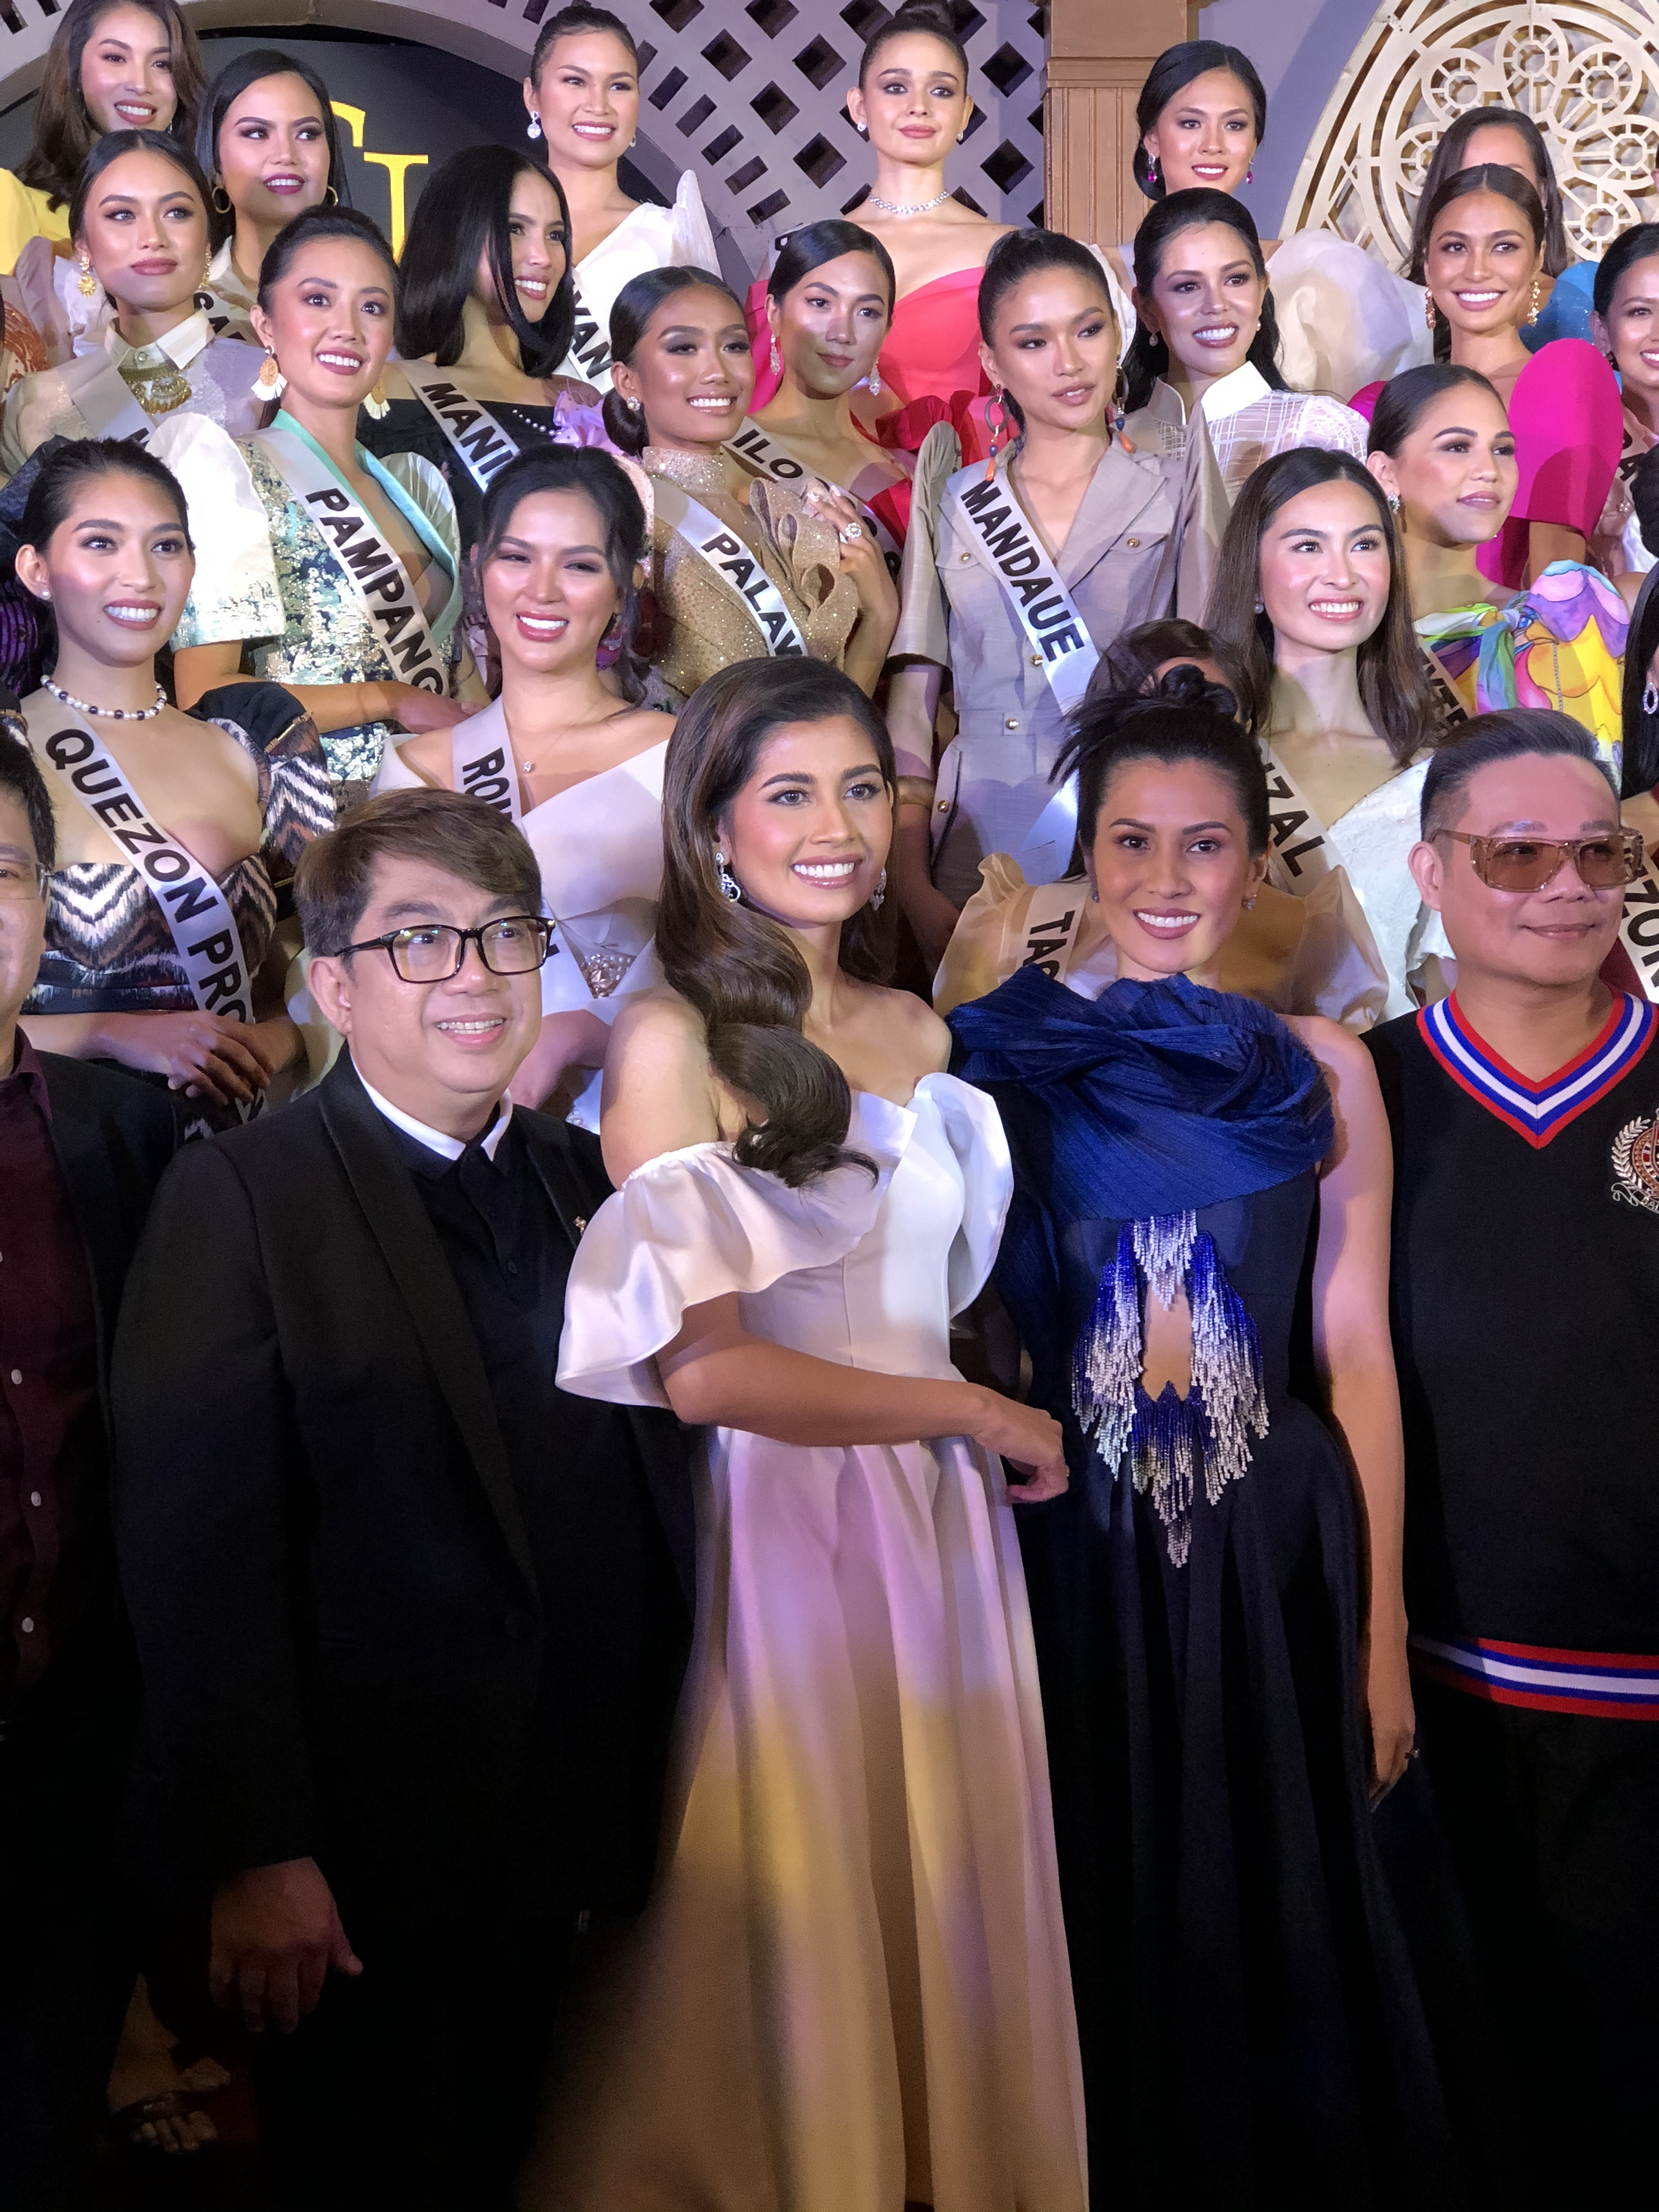 And Miss Universe Philippines 2020 is…